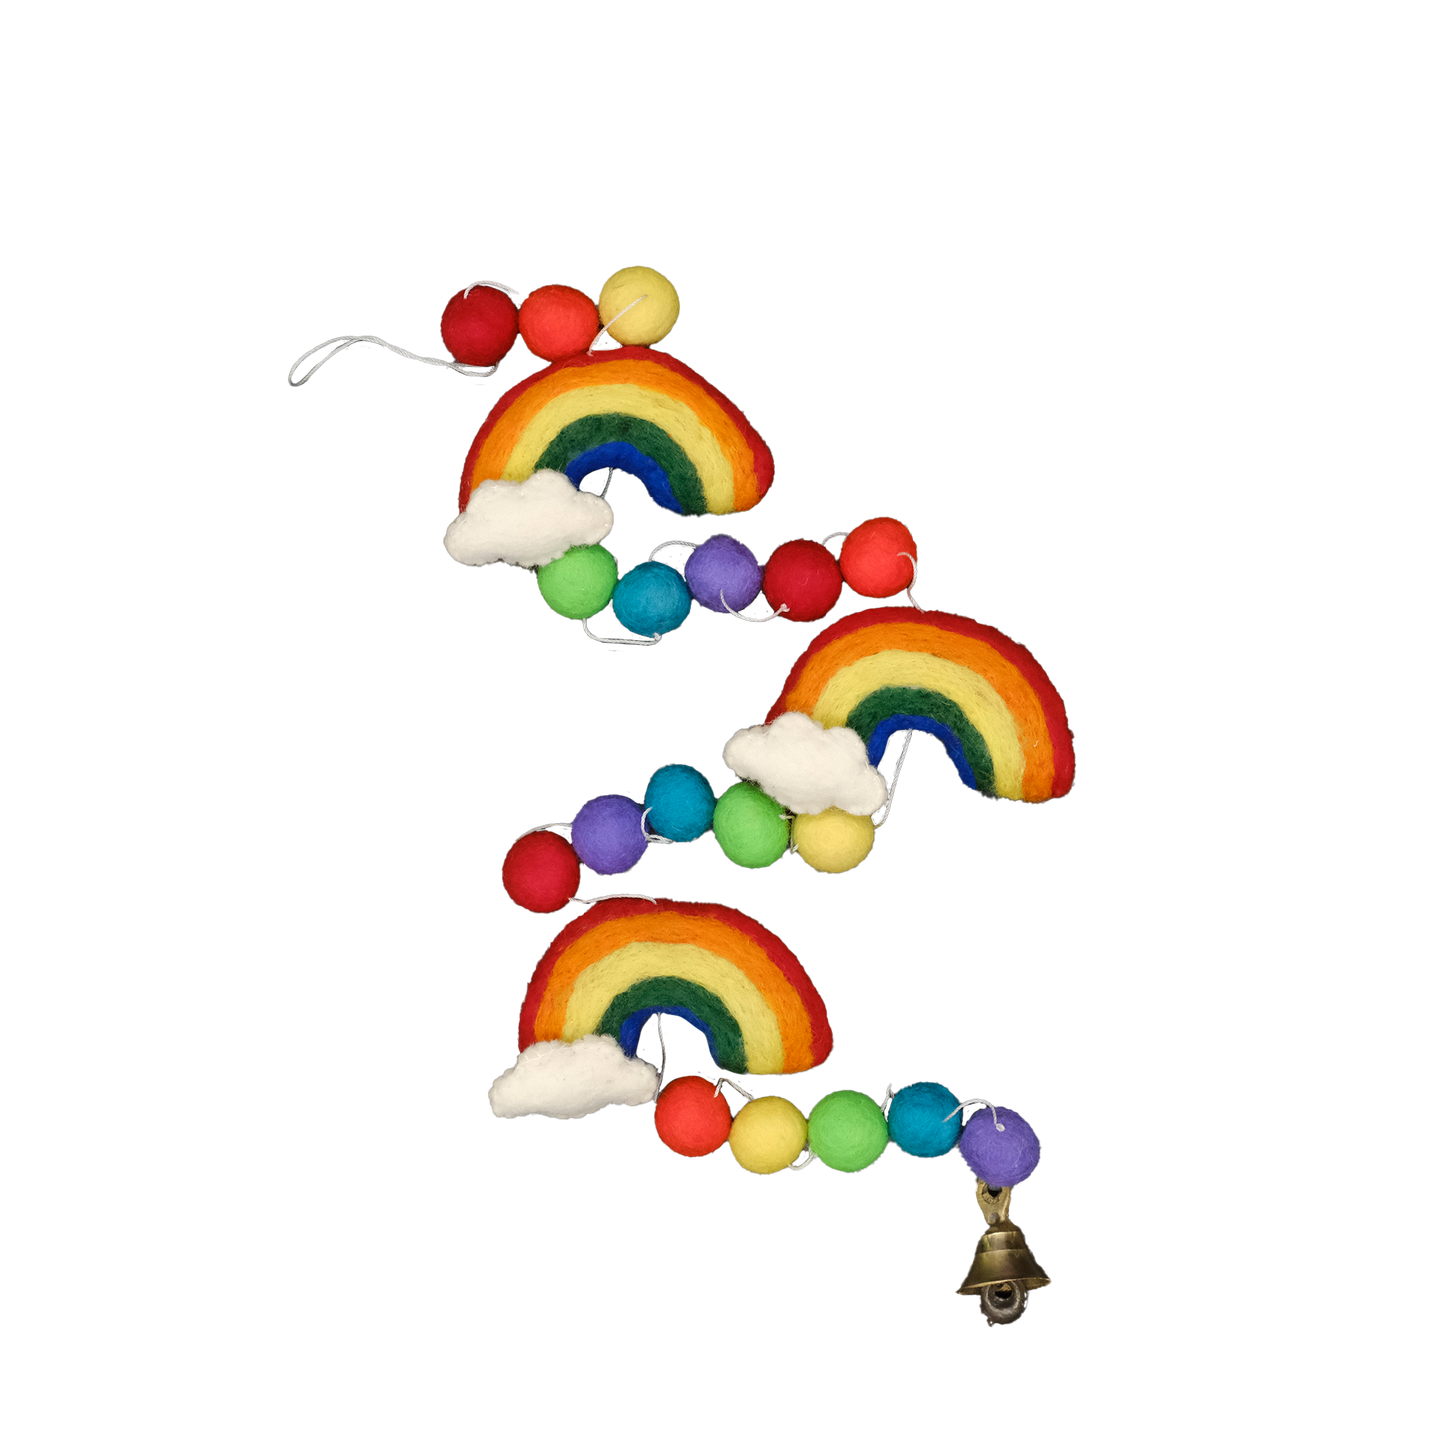 This Global Groove Life, handmade, ethical, fair trade, eco-friendly, sustainable, New Zealand Wool Felt, red, orange, yellow, green, blue & purple Rainbow Cloud Garland, was created by artisans in Kathmandu Nepal and will bring beautiful warmth, color and fun to your home.